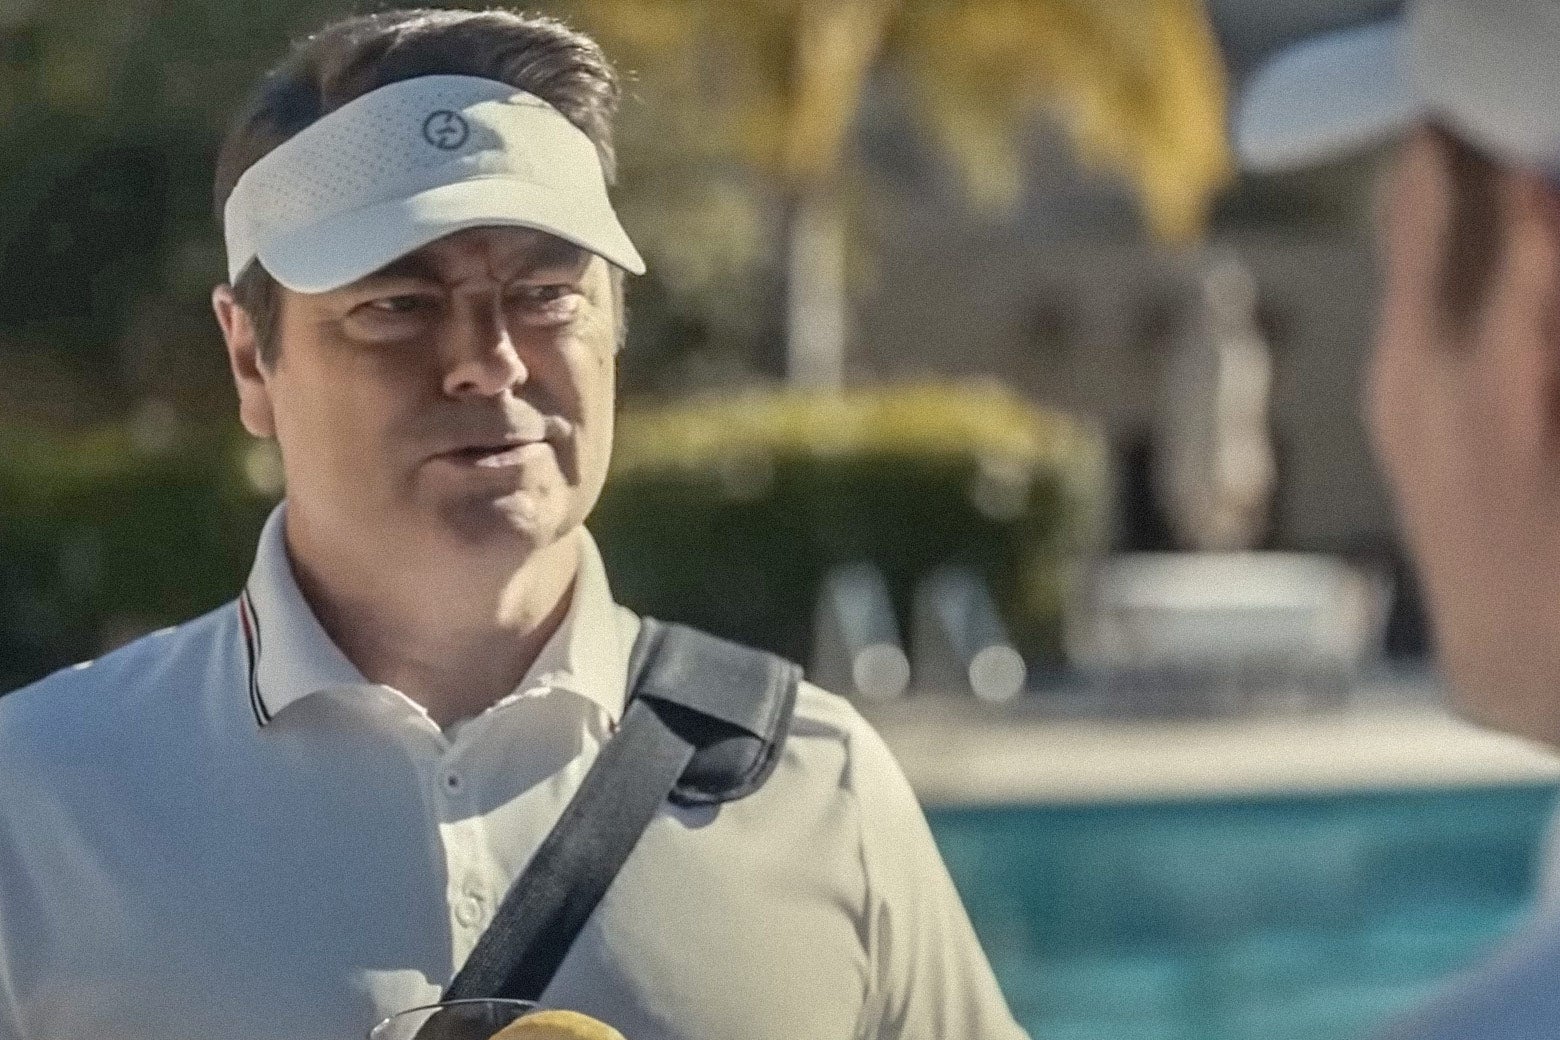 Nick Offerman in a still from the movie wears a visor and a golf polo and looks skeptical. 